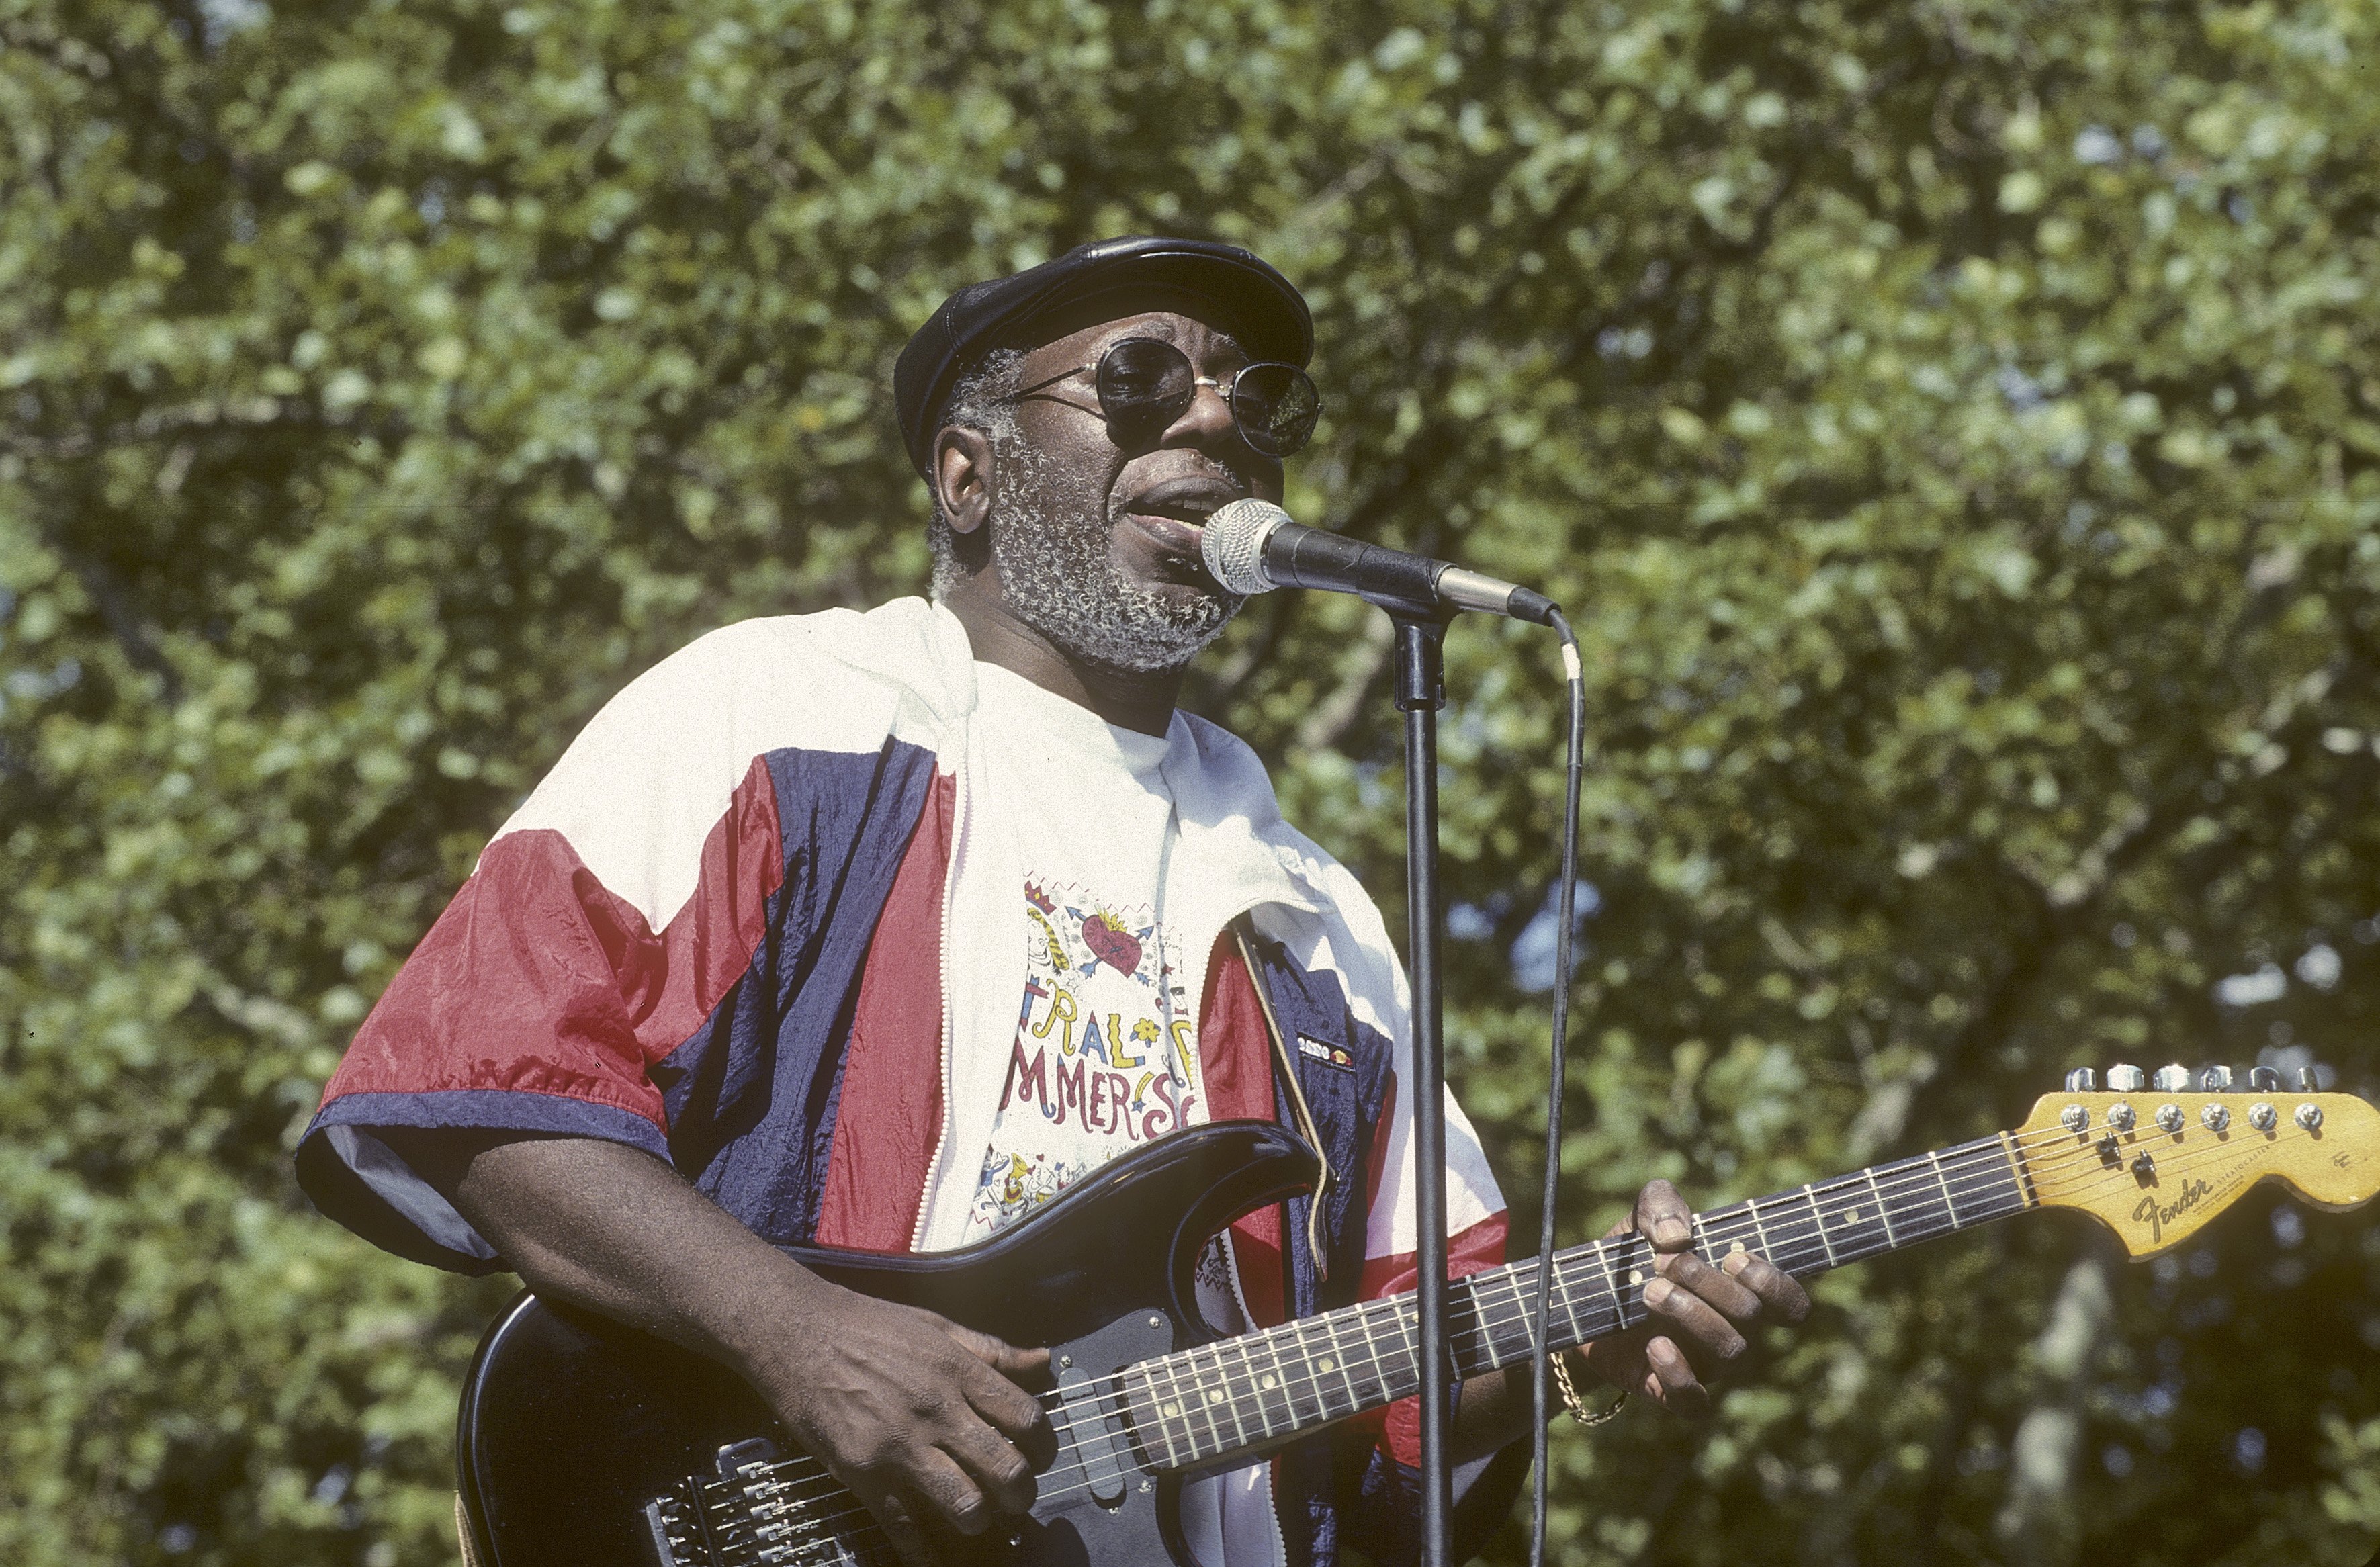  Curtis Mayfield performing at Central Park's Summer Stage, New York, on July 7, 1990 | Photo: Getty Images